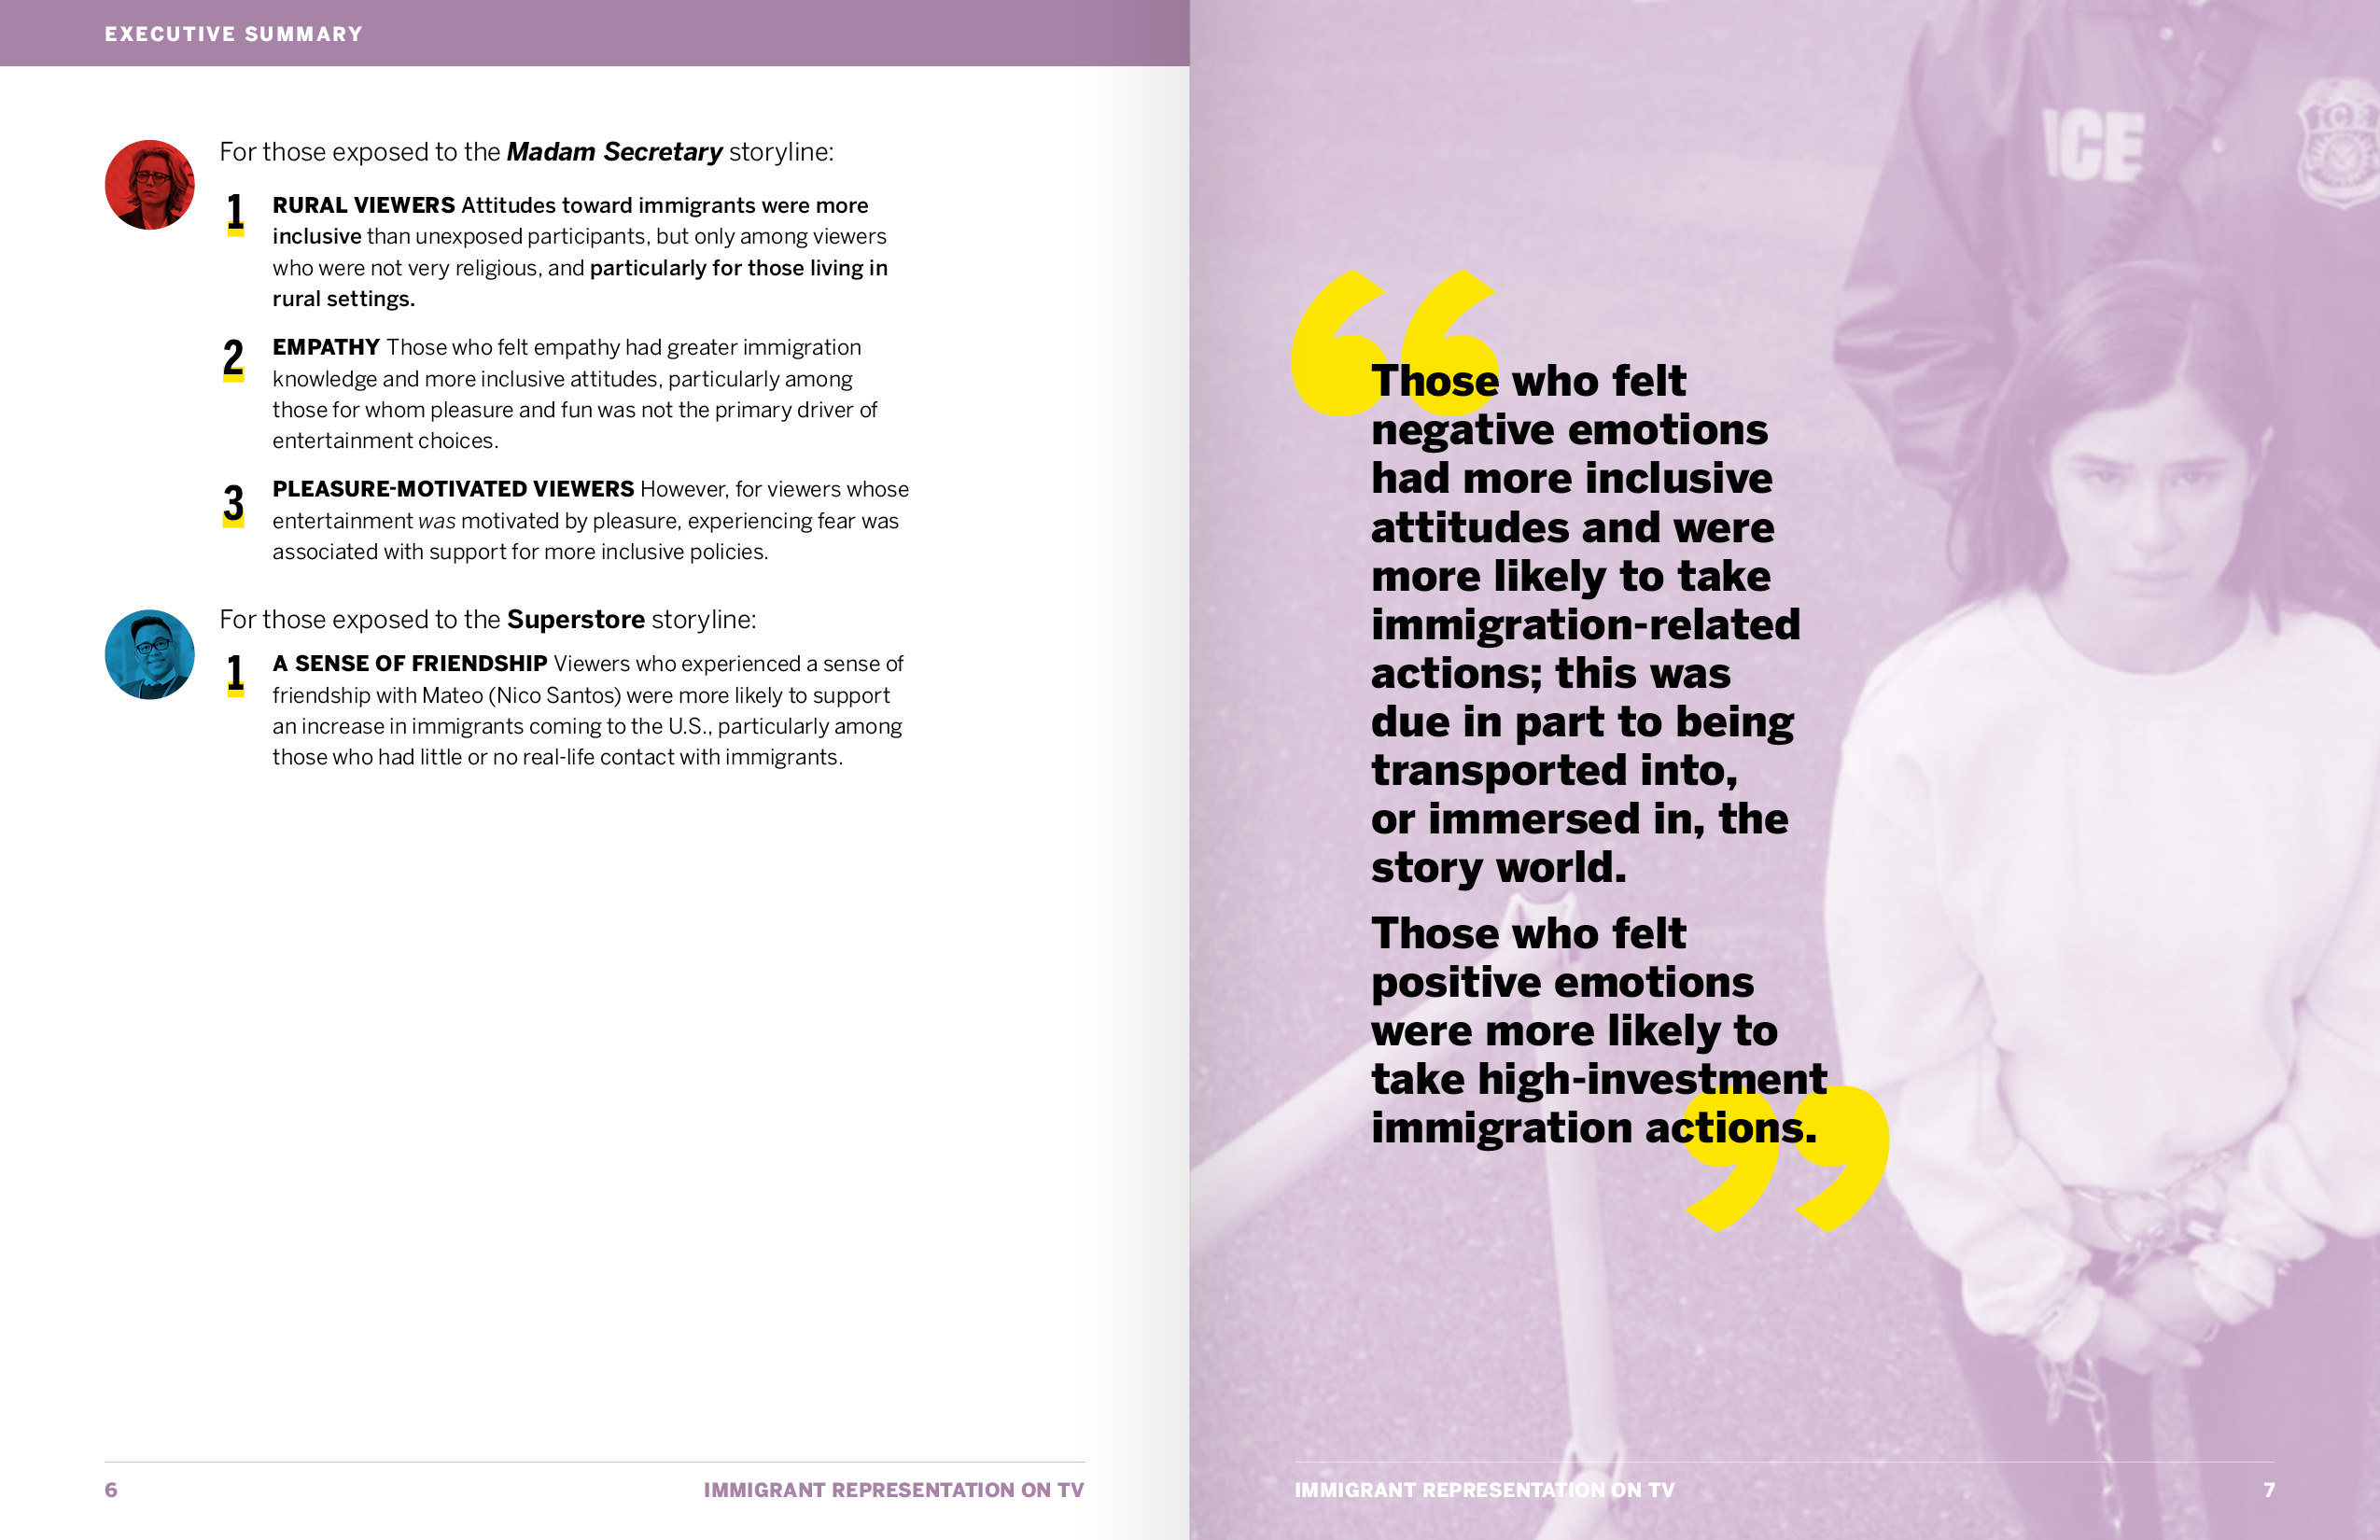 Spread from the Executive Summary. The right page is a lavender-tinted screenshot from Orange is the New Black of a Latina character in handcuffs. Beside her is the quote 'Those who felt negative emotions had more inclusive attitudes and were more likely to take immigration-related actions; this was due in part to being transported into, or immersed in, the story world. Those who felt positive emotions were more likely to take high-investment immigration actions.'